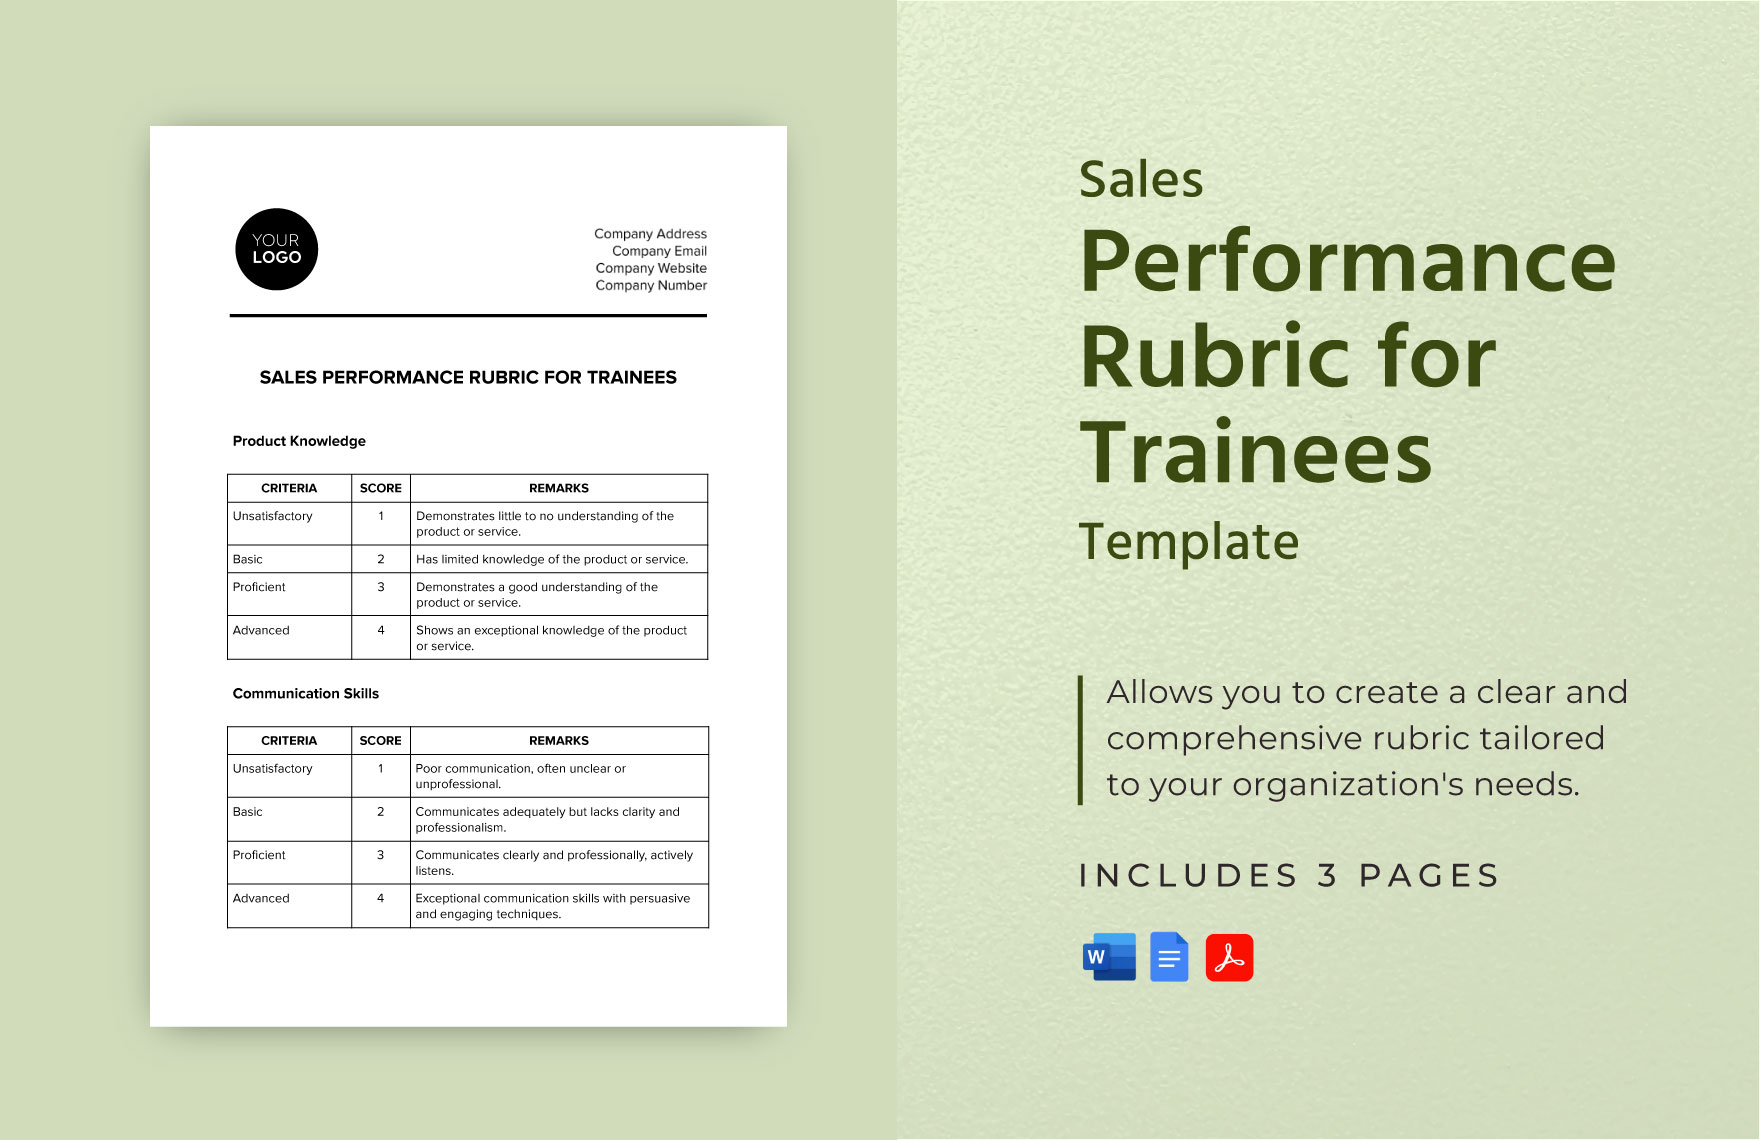 Sales Performance Rubric for Trainees Template